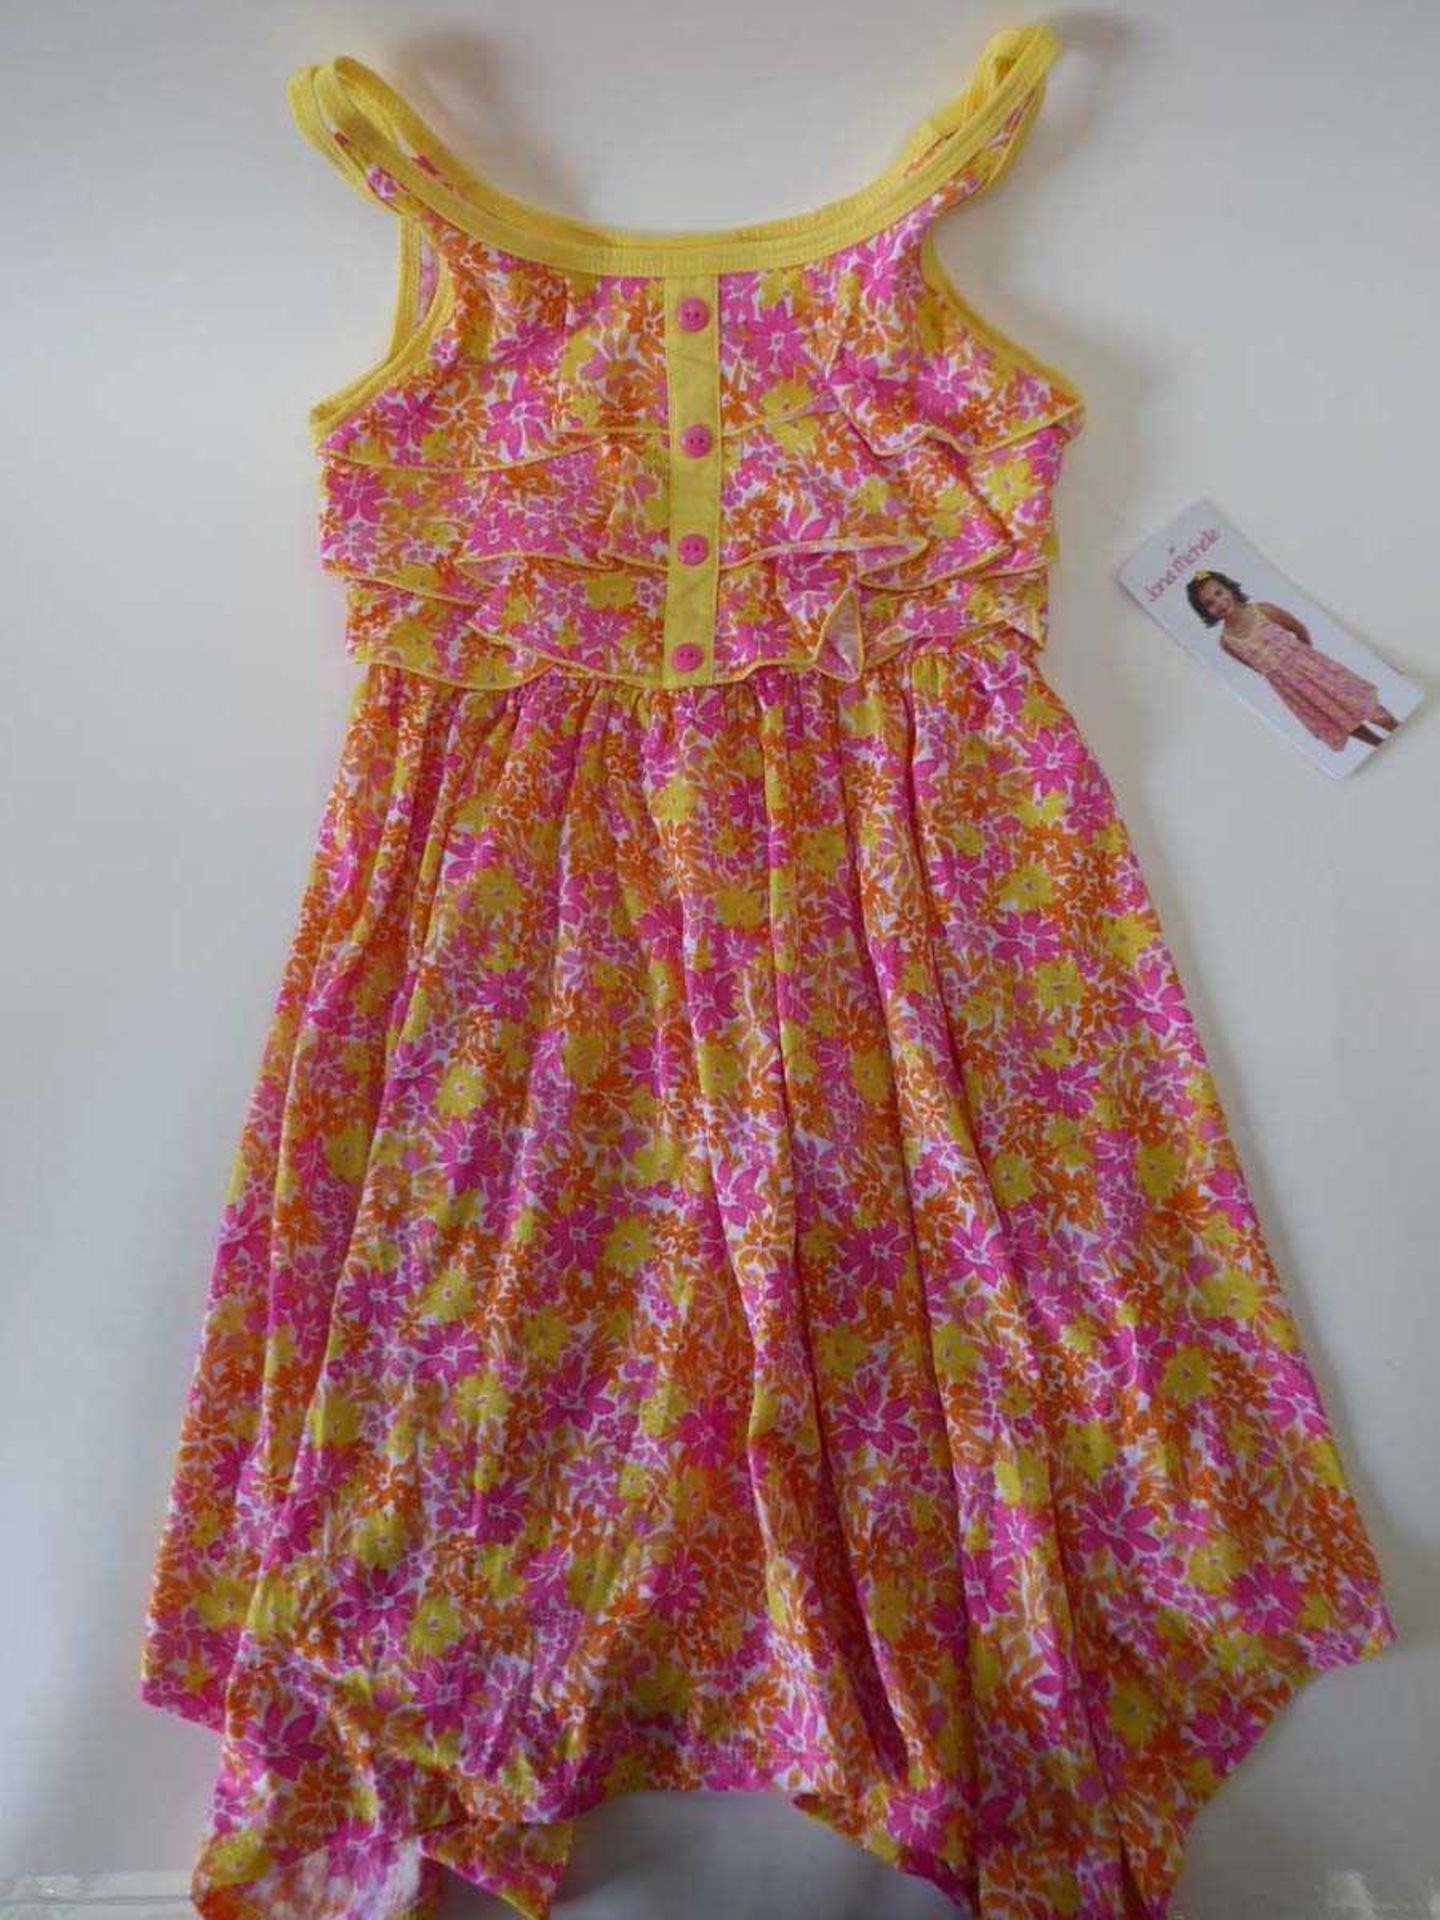 +VAT Approx. 25 children's Jona Michelle dresses, in 4 different patterns and various sizes - Image 4 of 5